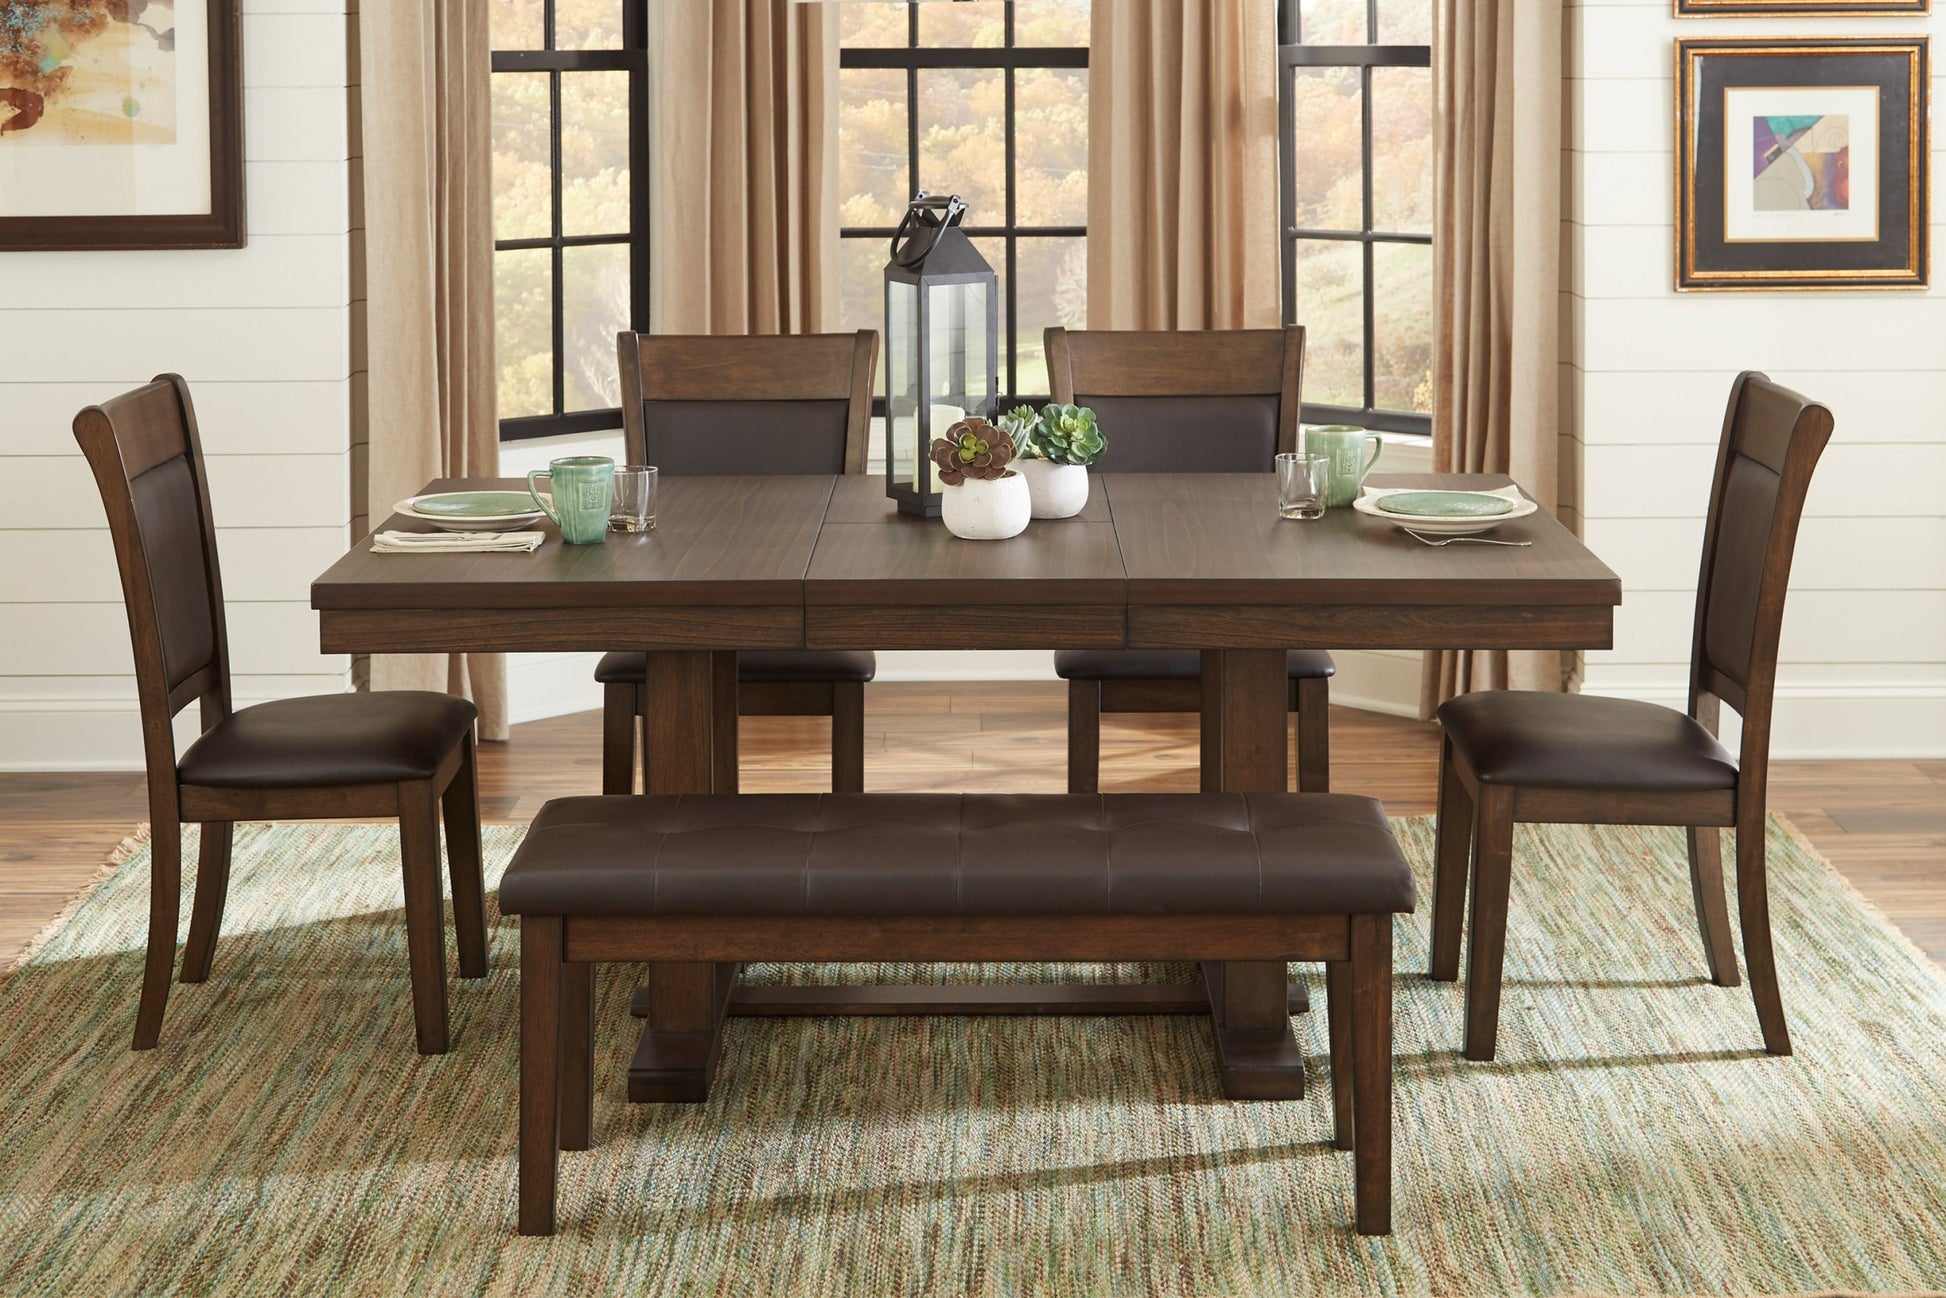 Transitional 6pc Dining Set Table with Self Storing wood-wood-brown mix-seats 6-wood-dining